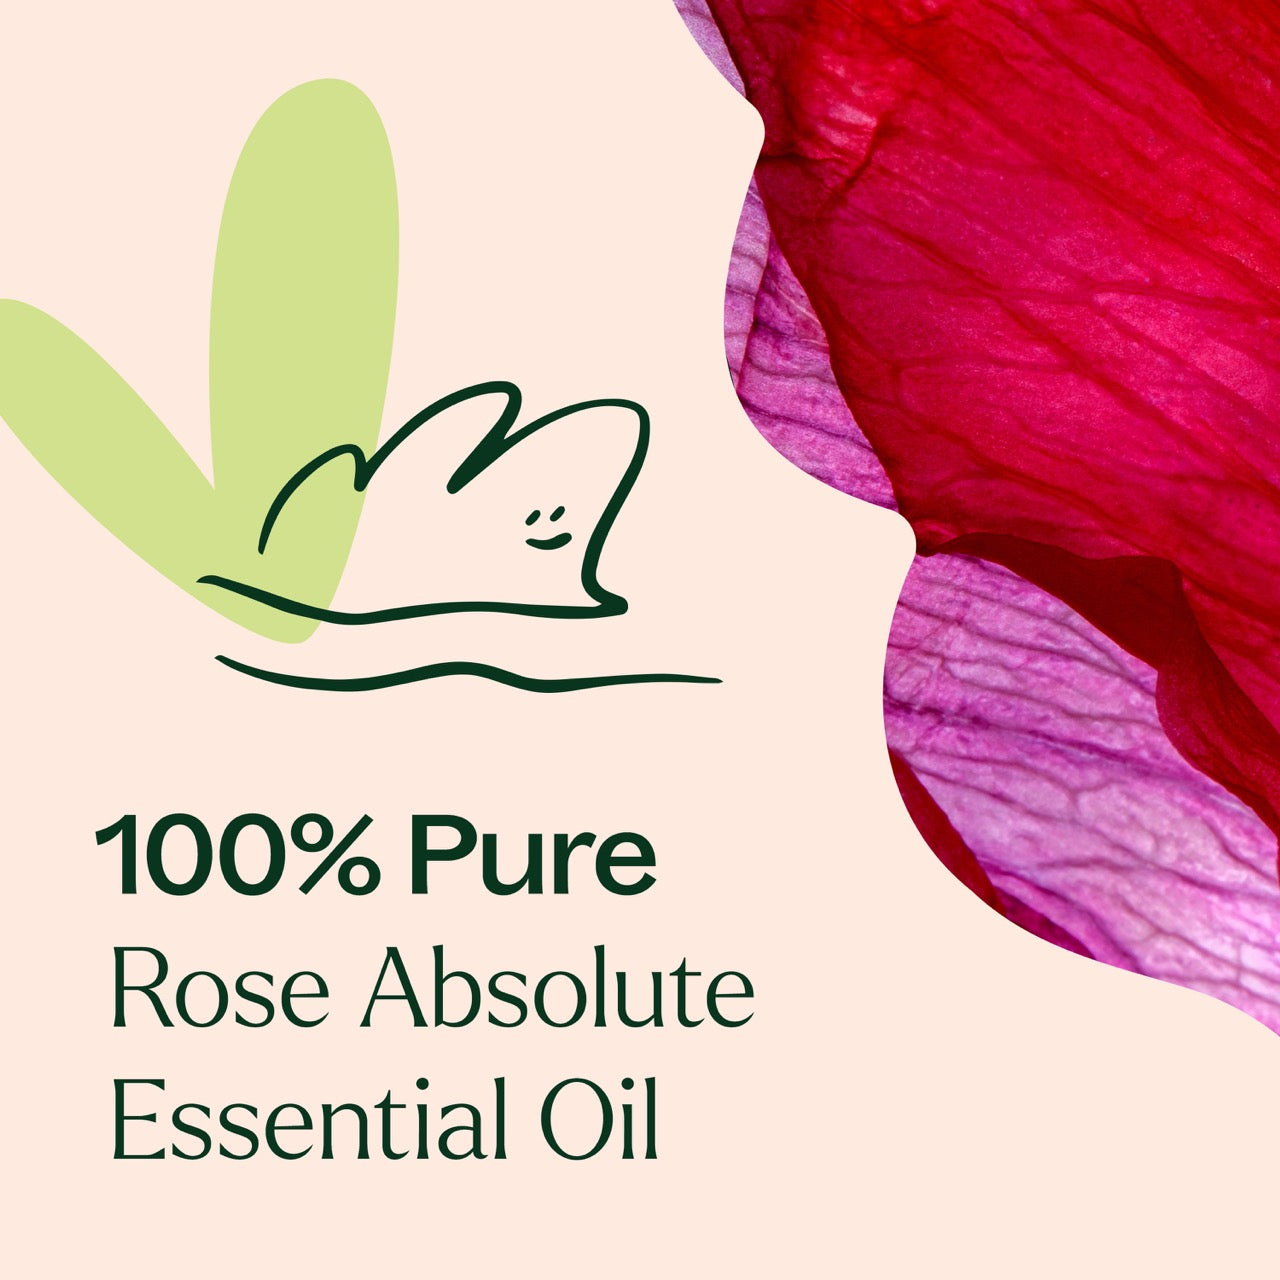 100% pure rose absolute essential oil